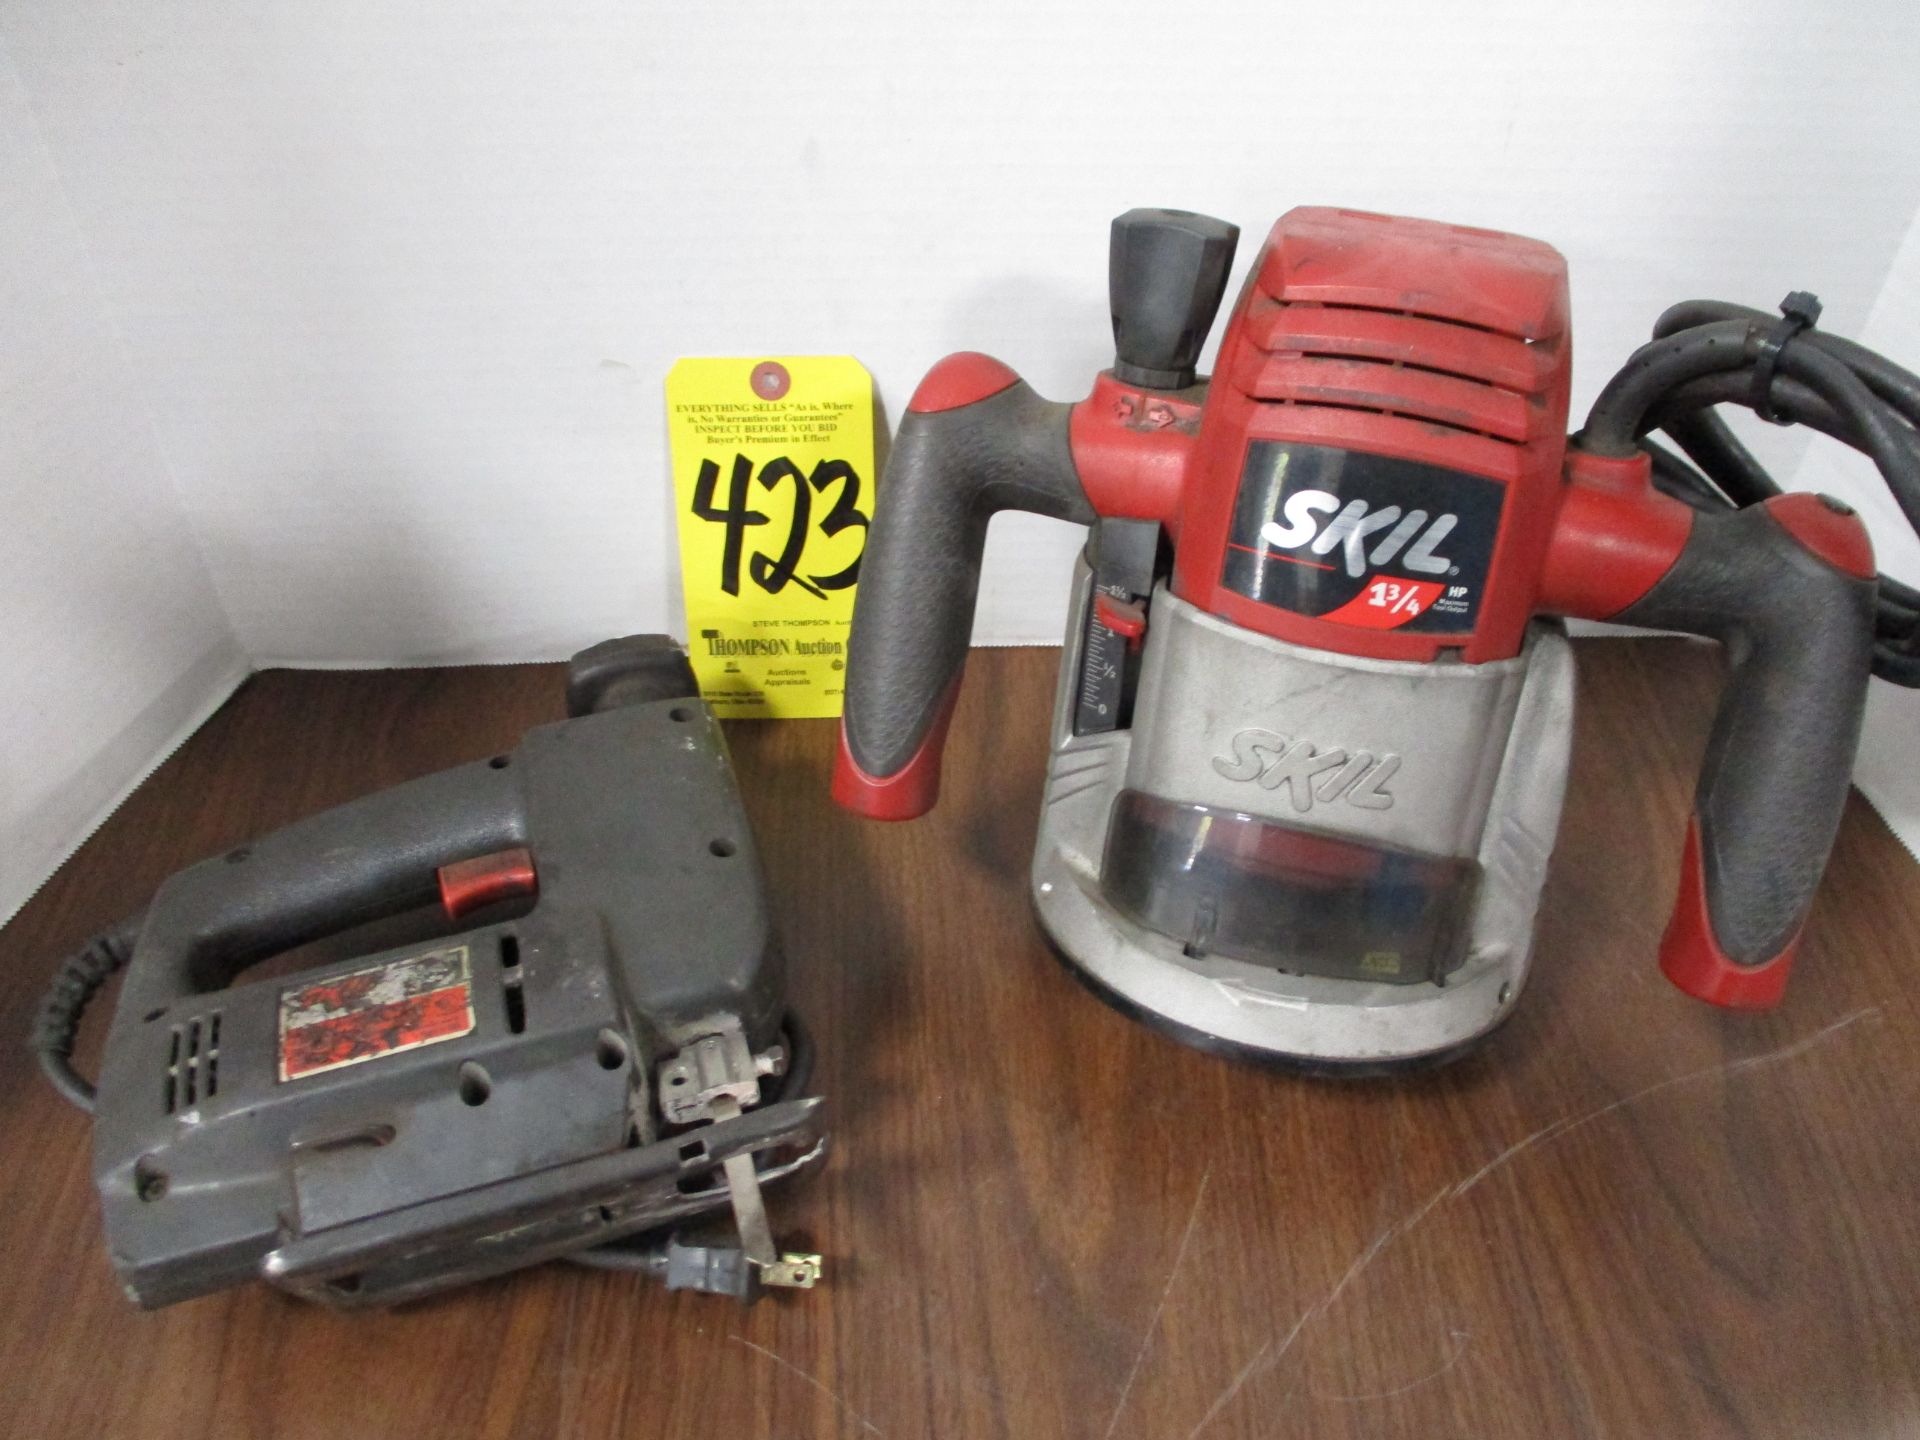 Skil Router and Skil Jig Saw